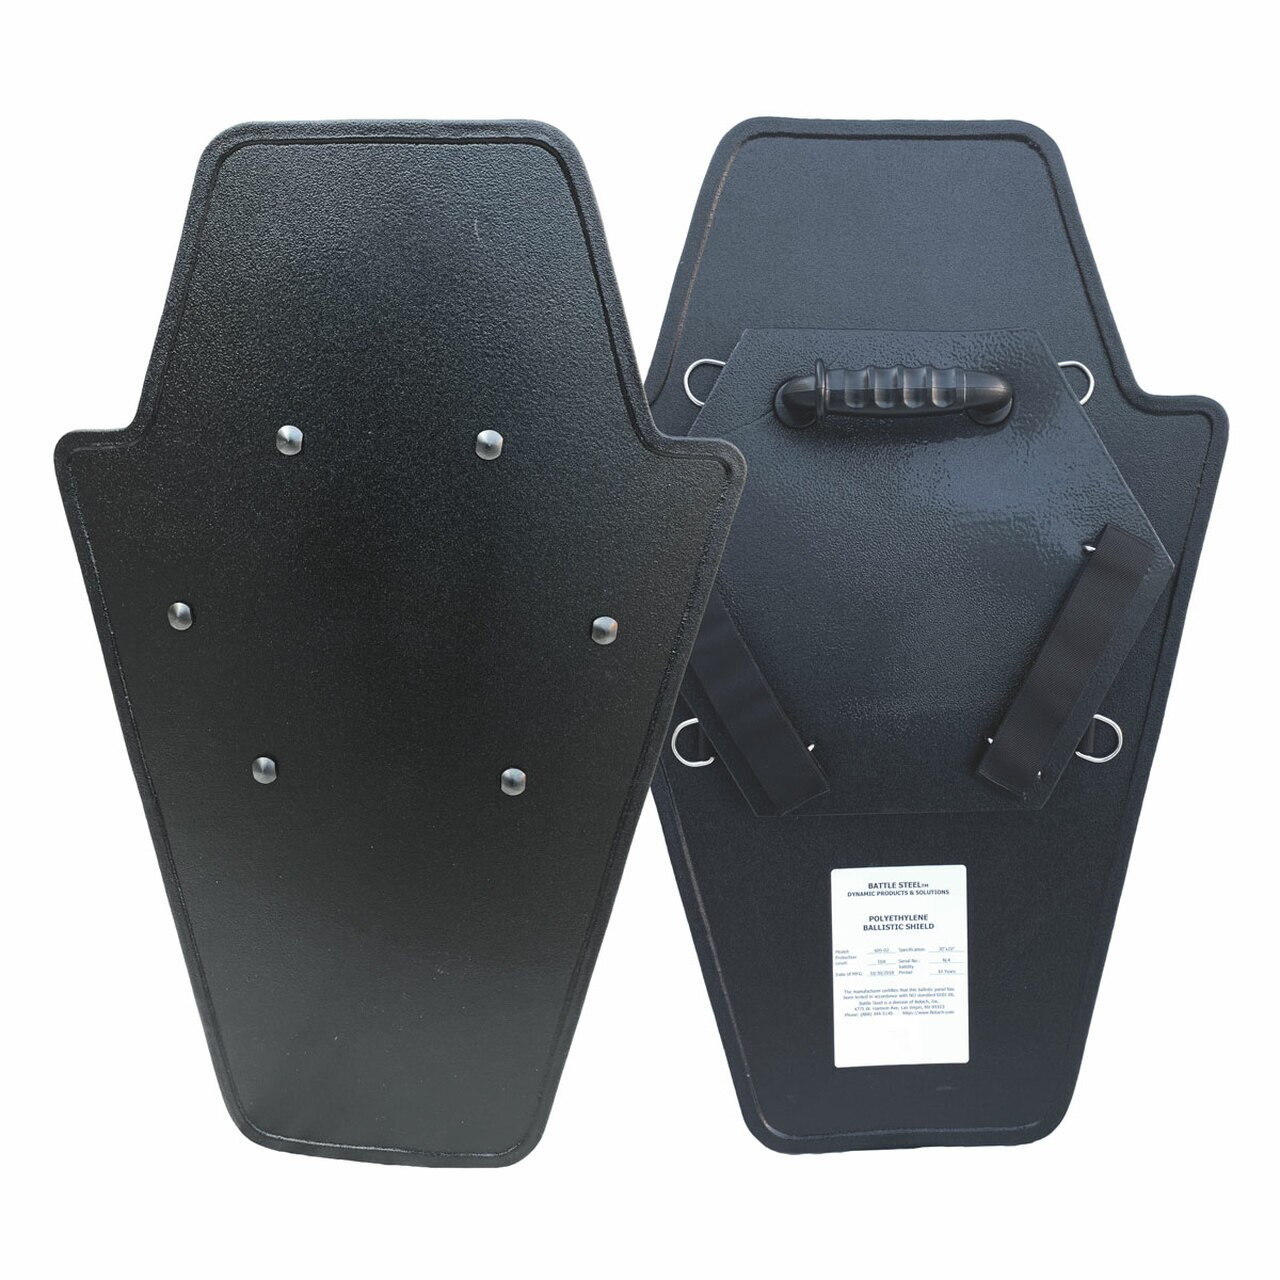 5 Things to Know When Buying Ballistic Shields